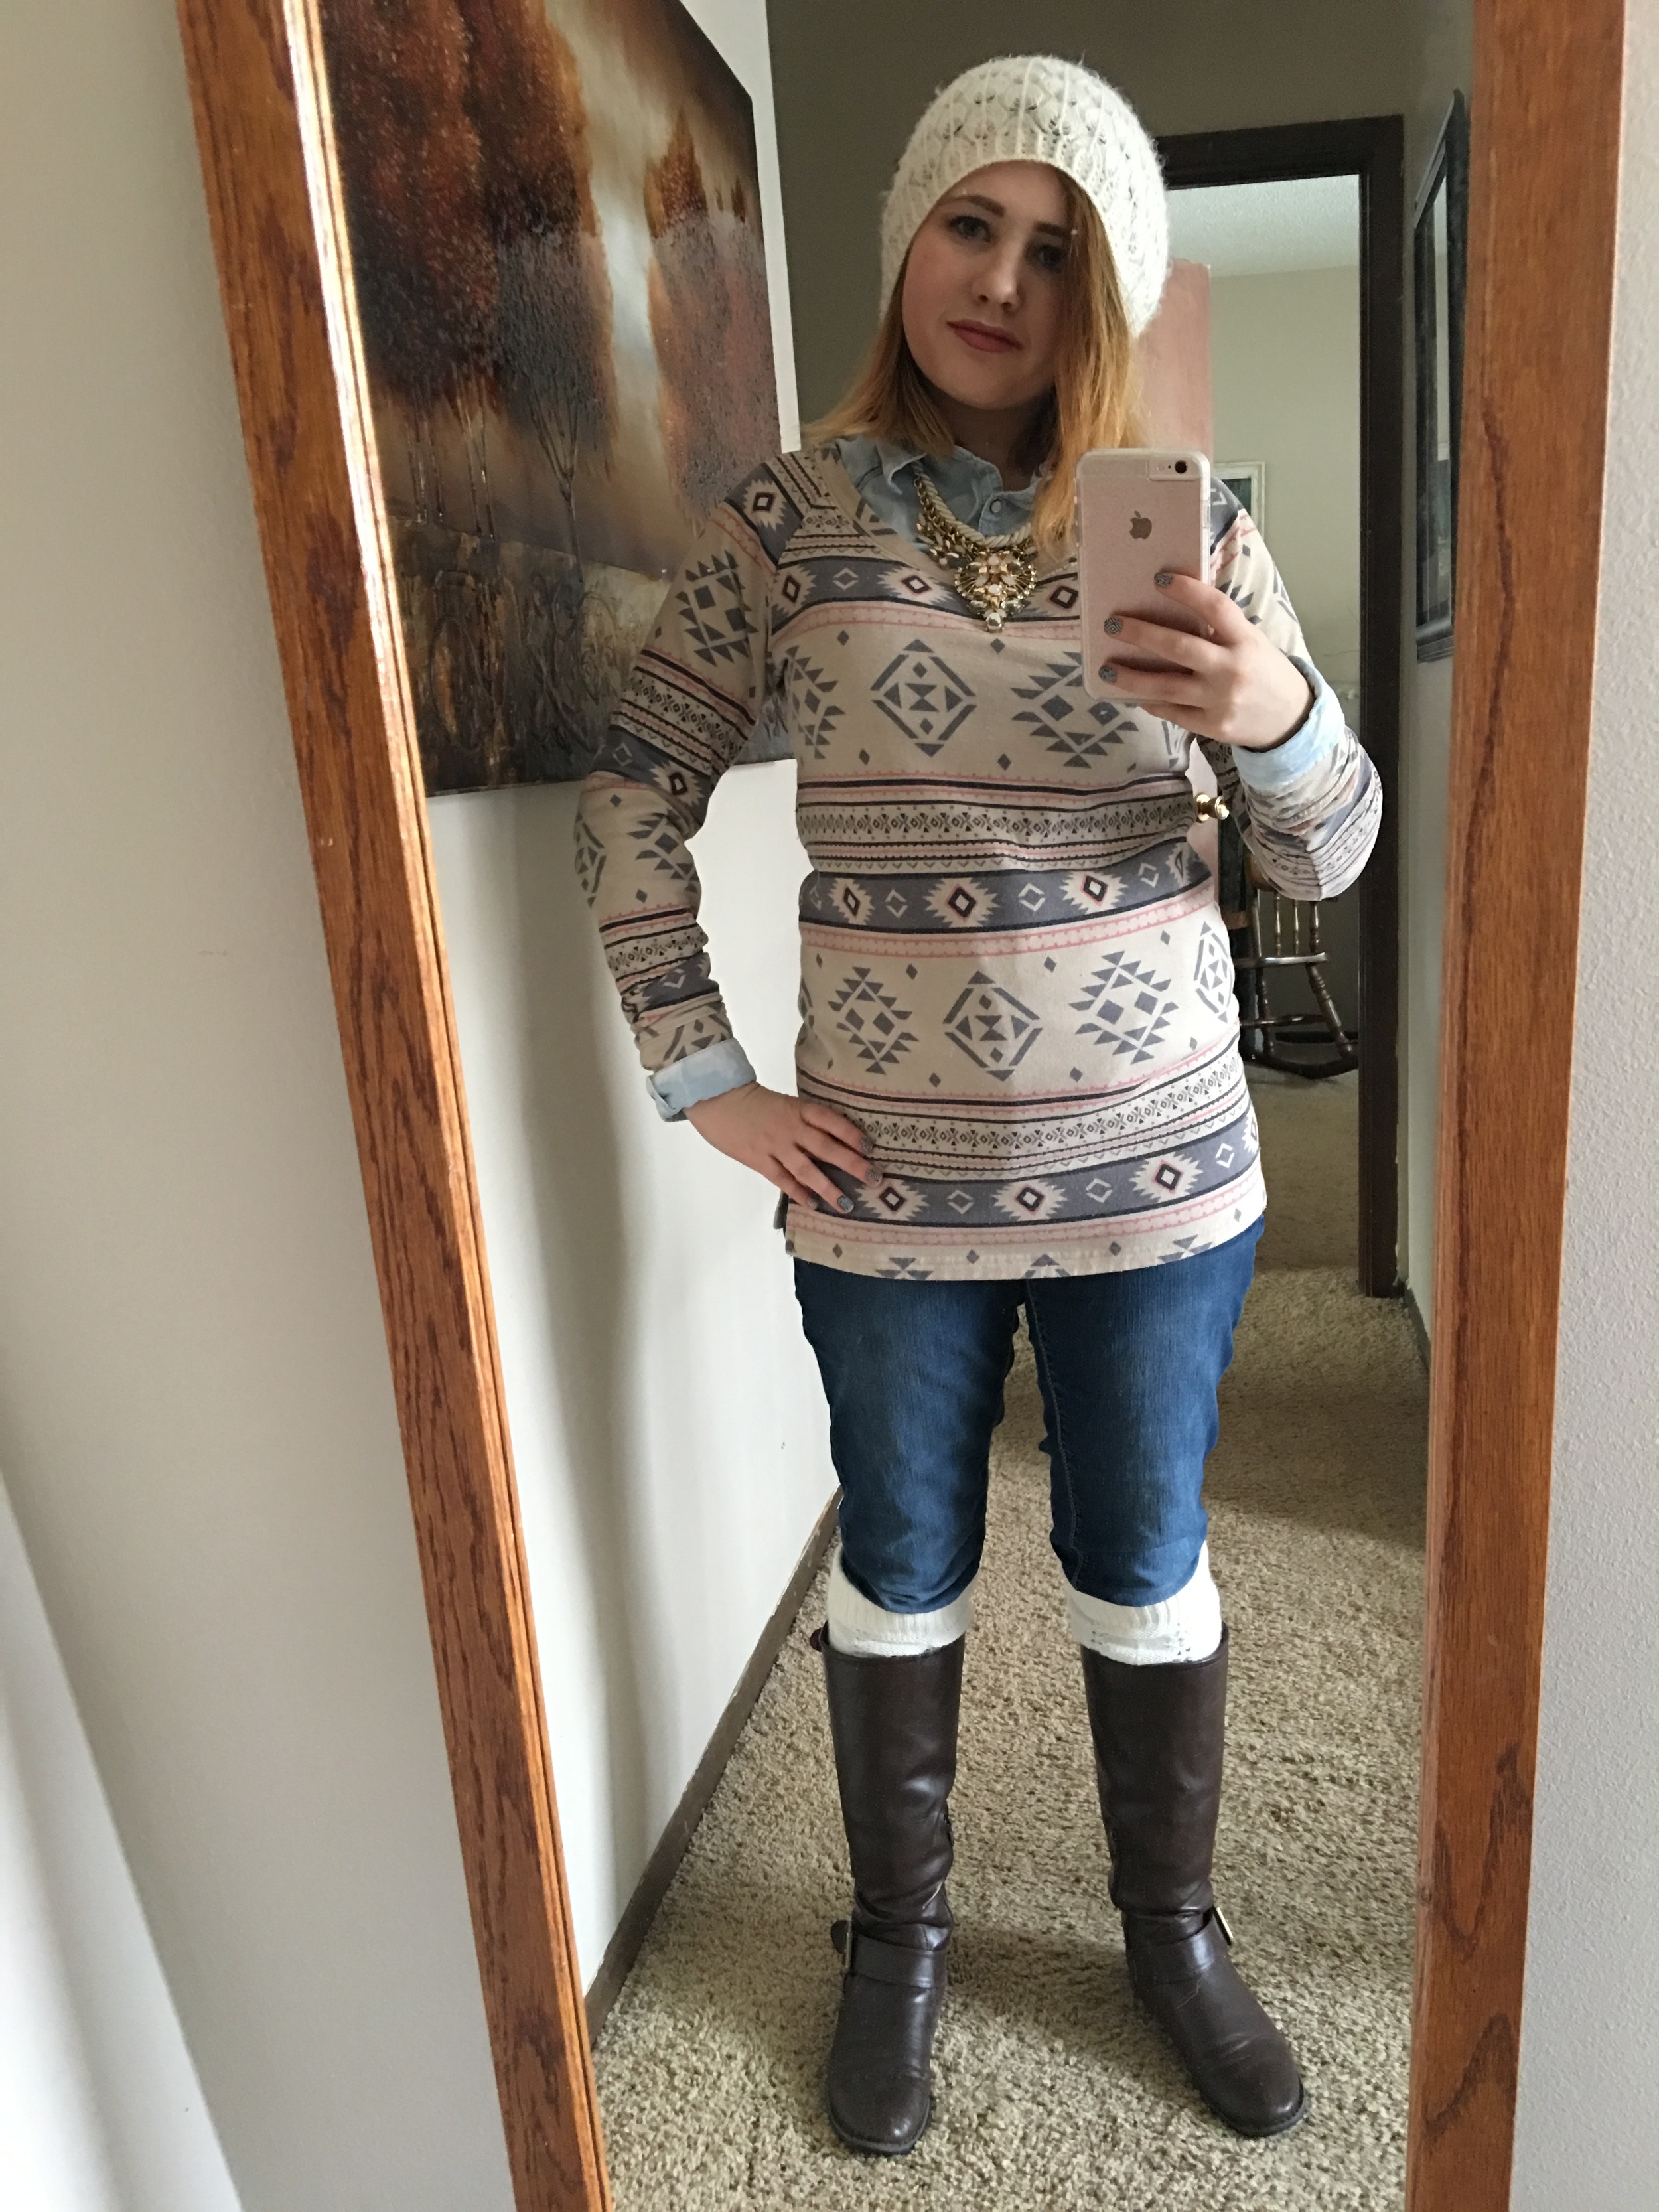 White beanie from Wet Seal, Aztec sweater from Maurices, leg warmers, brown boots from DSW, button up shirt from Maurices, necklace from Target, and jeans from Maurices.